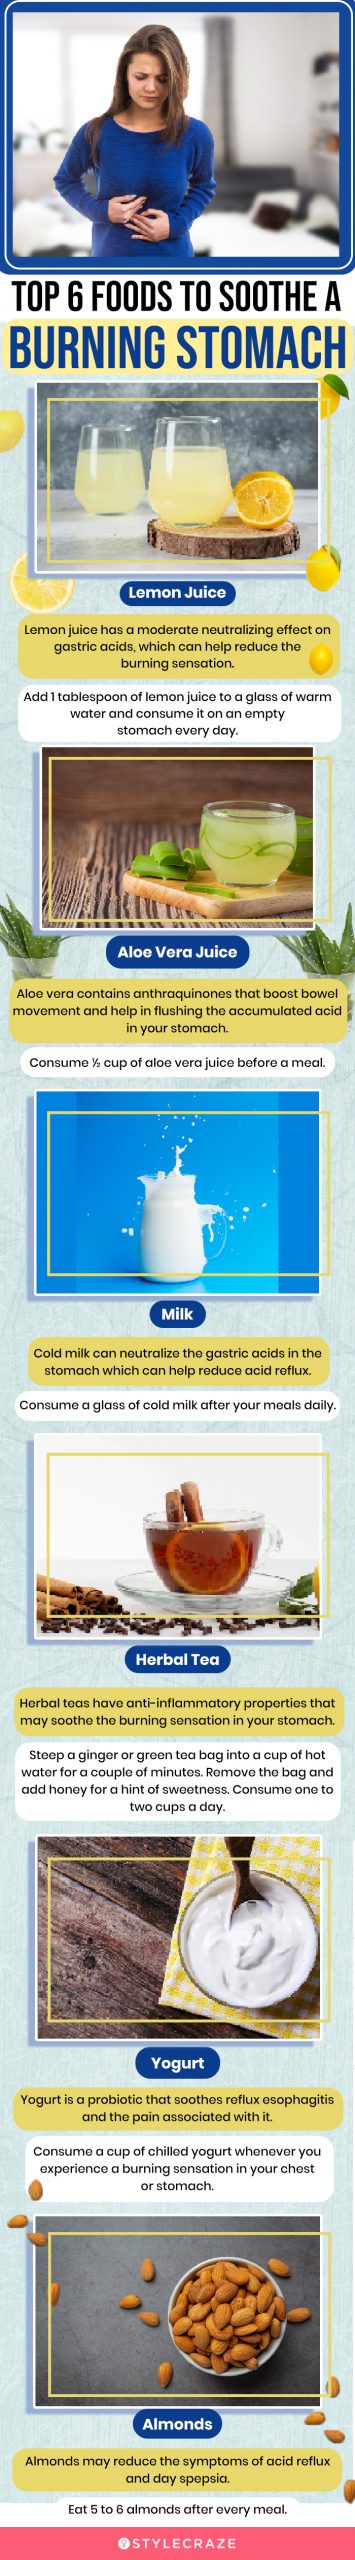 top 6 foods to soothe a burning stomach (infographic)